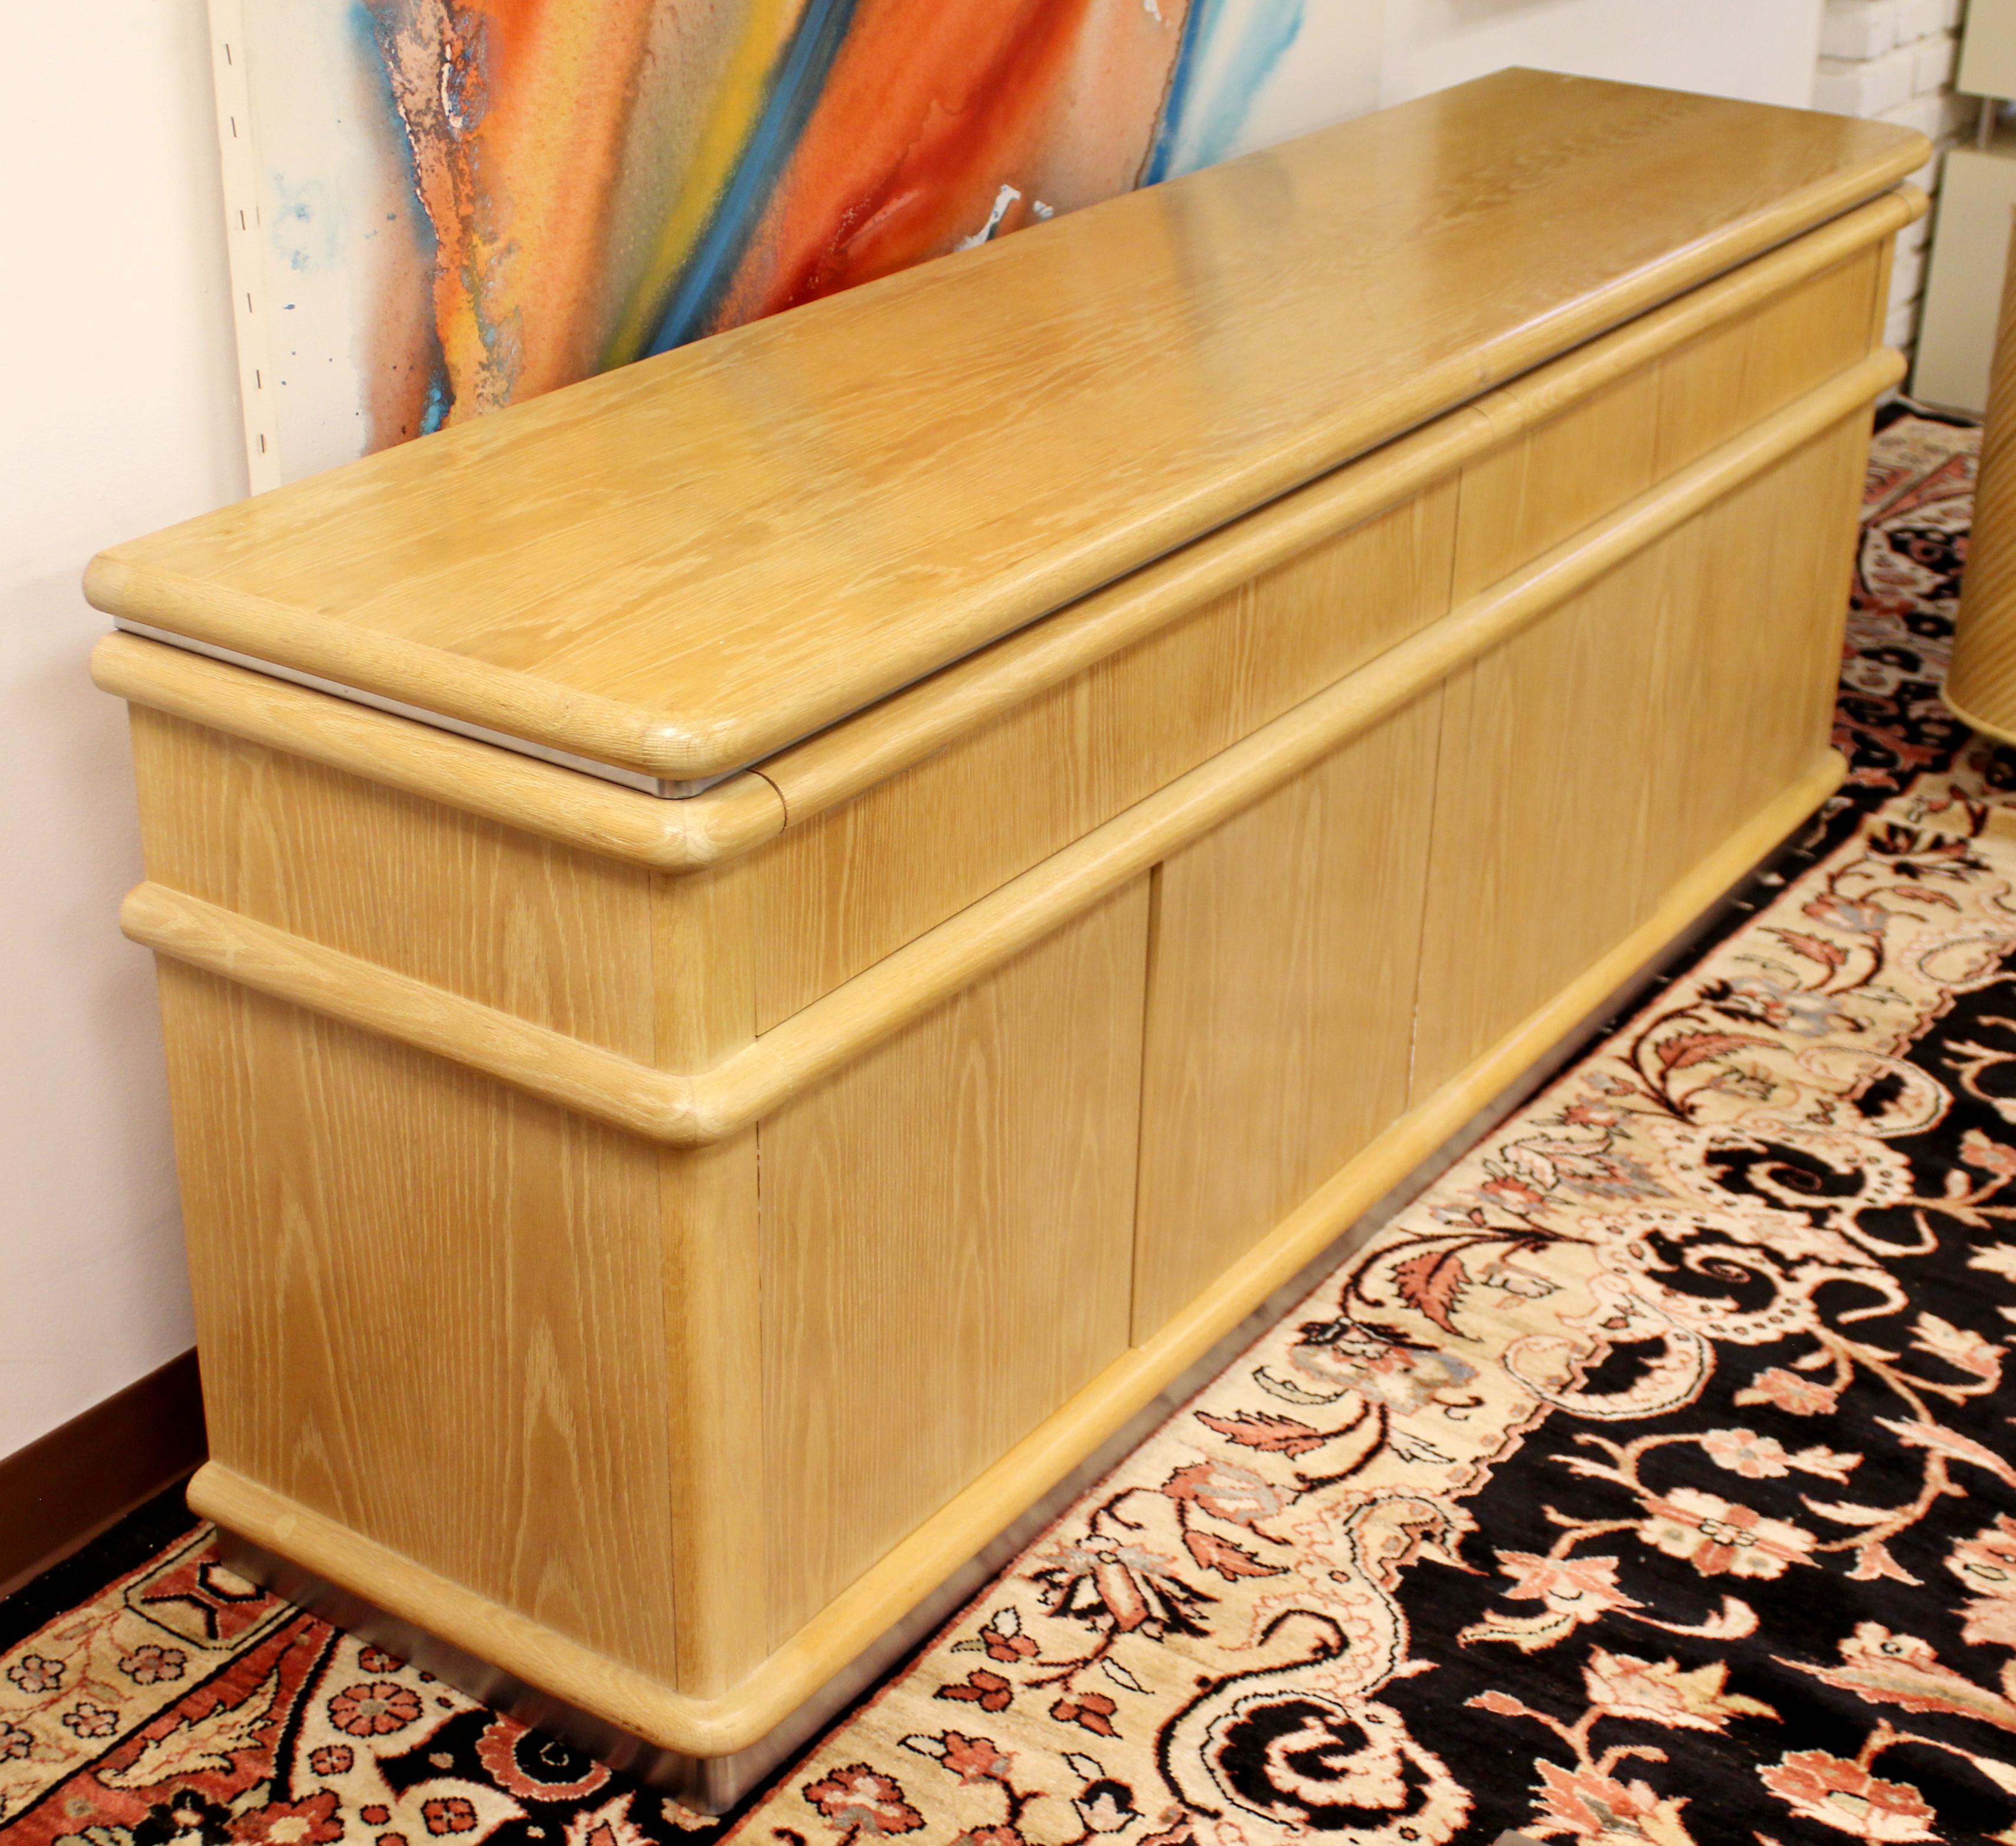 Late 20th Century Contemporary Modern Signed Jay Spectre Credenza Cerused Oak and Chrome 1980s